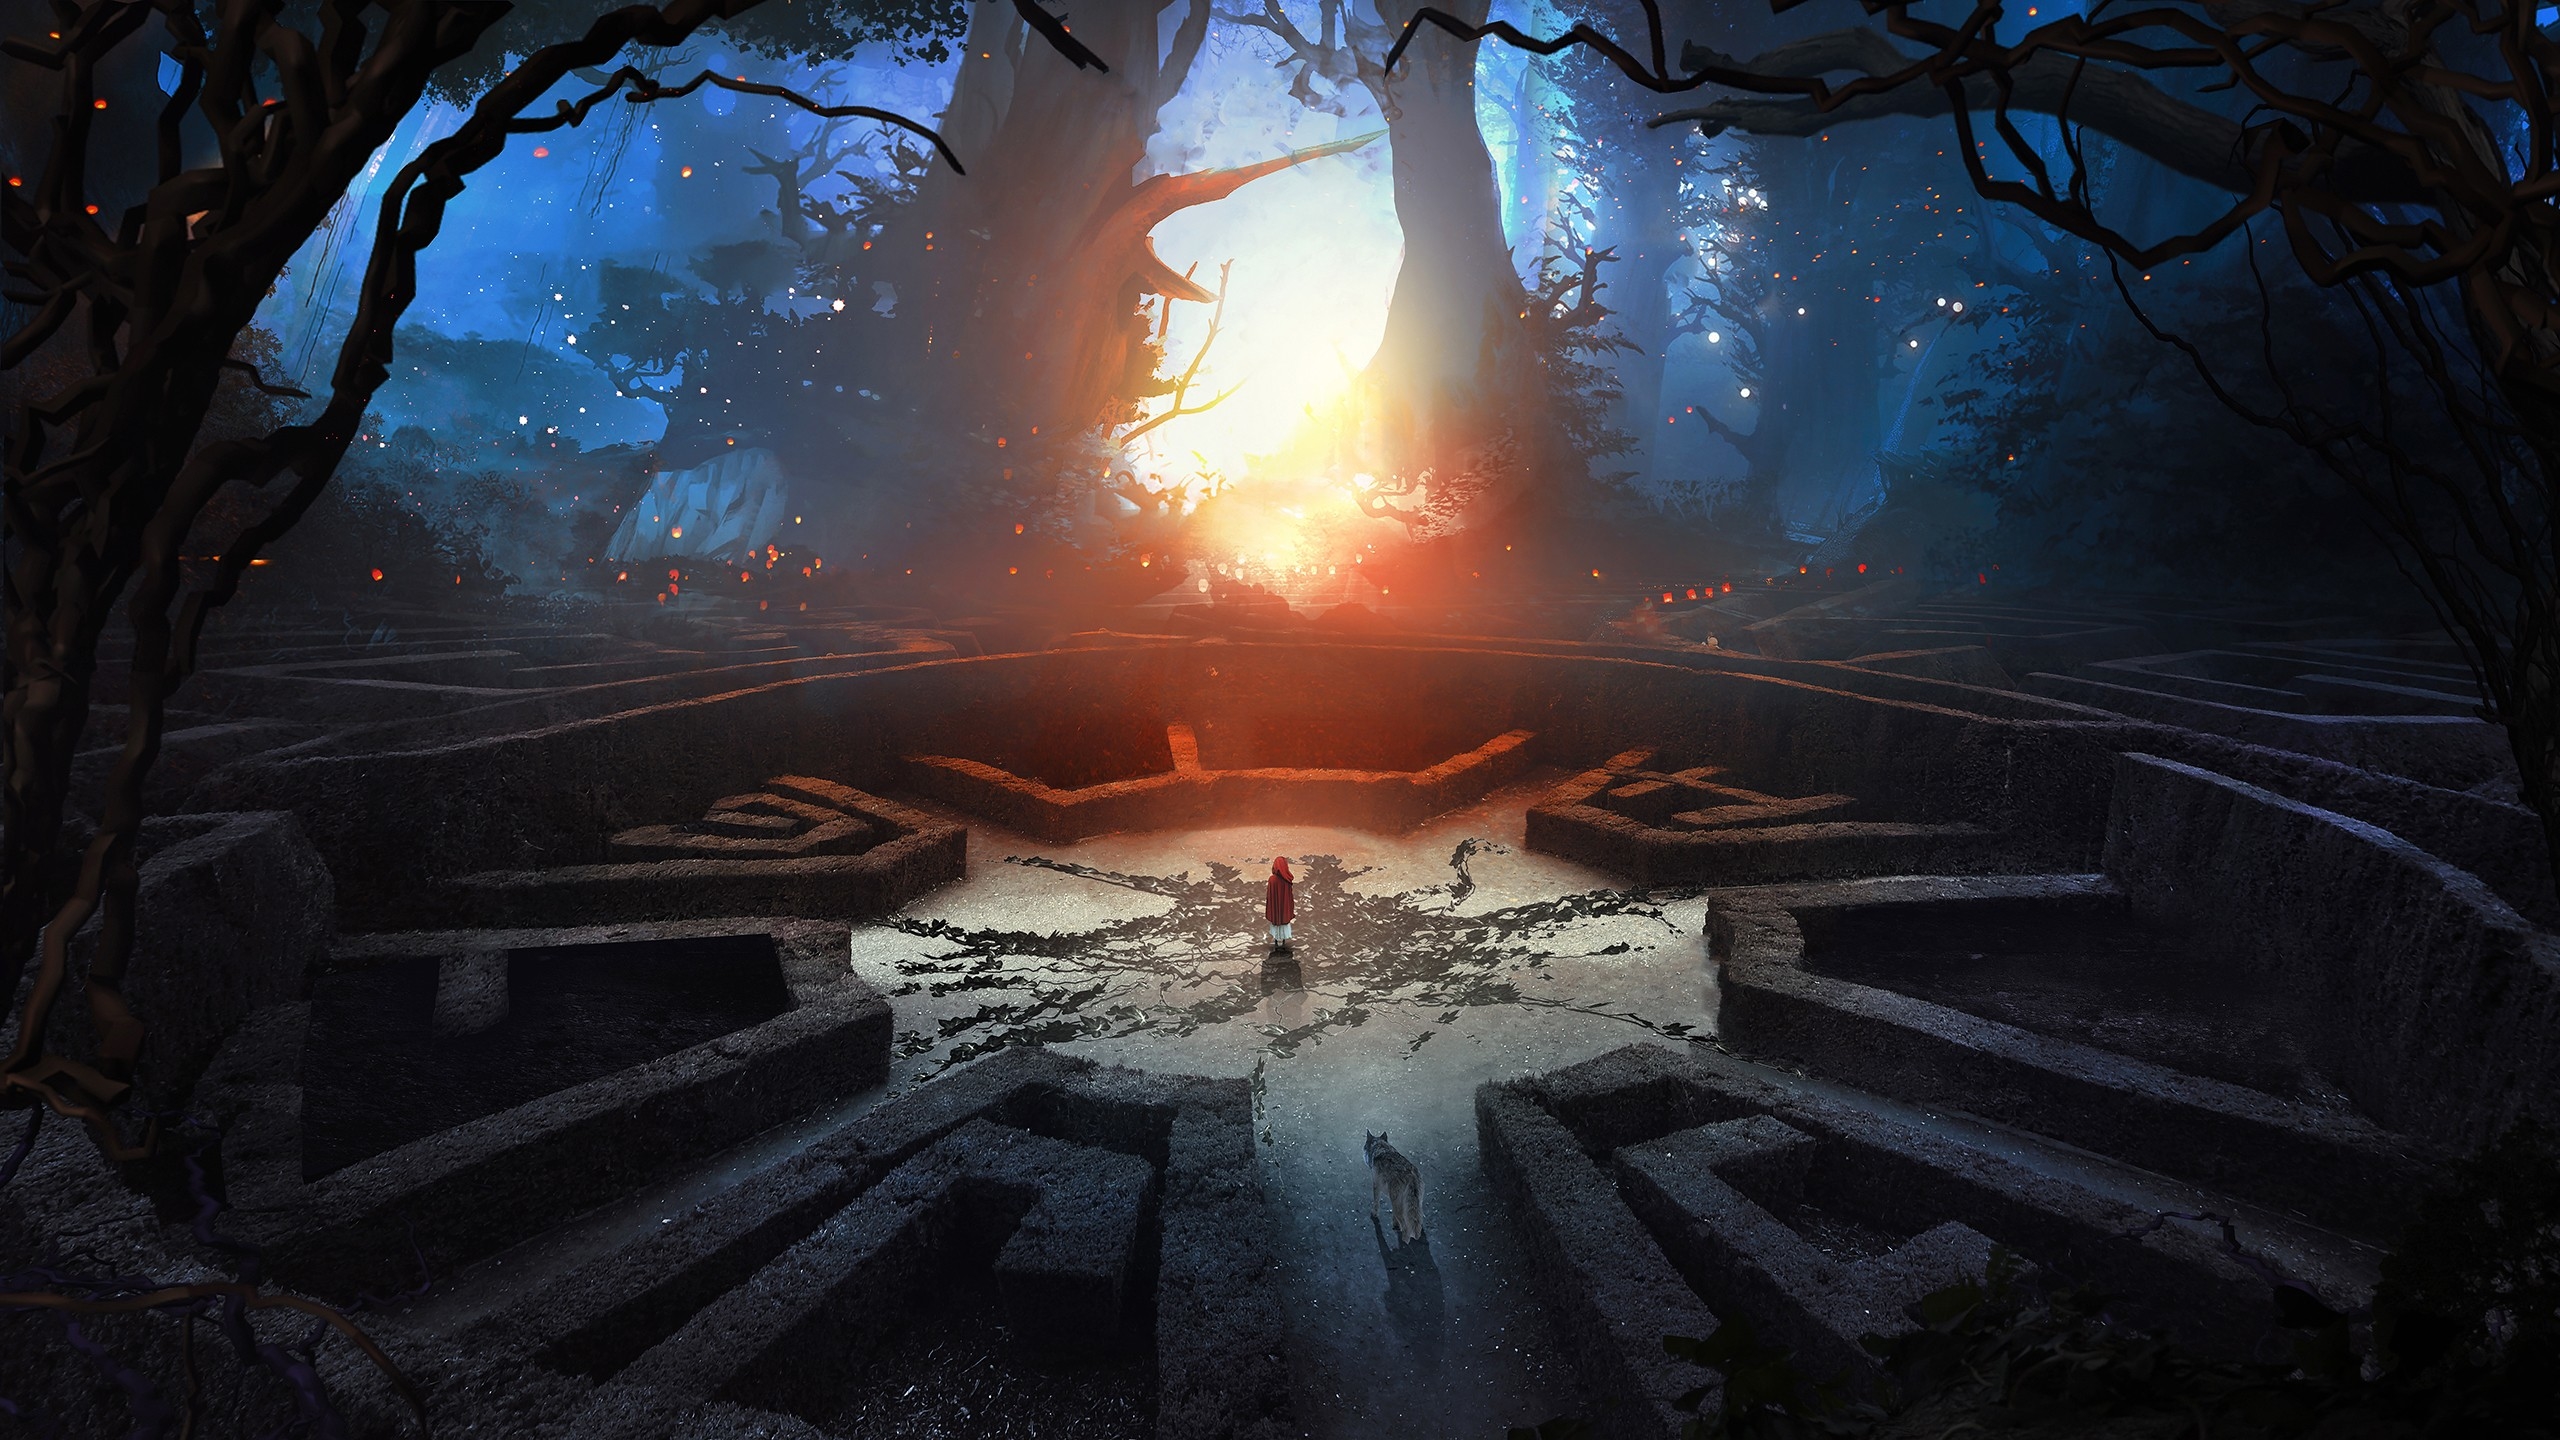 Labyrinth Wolf And Boy 3d Abstract Fantasy Art, Full HD 2K 